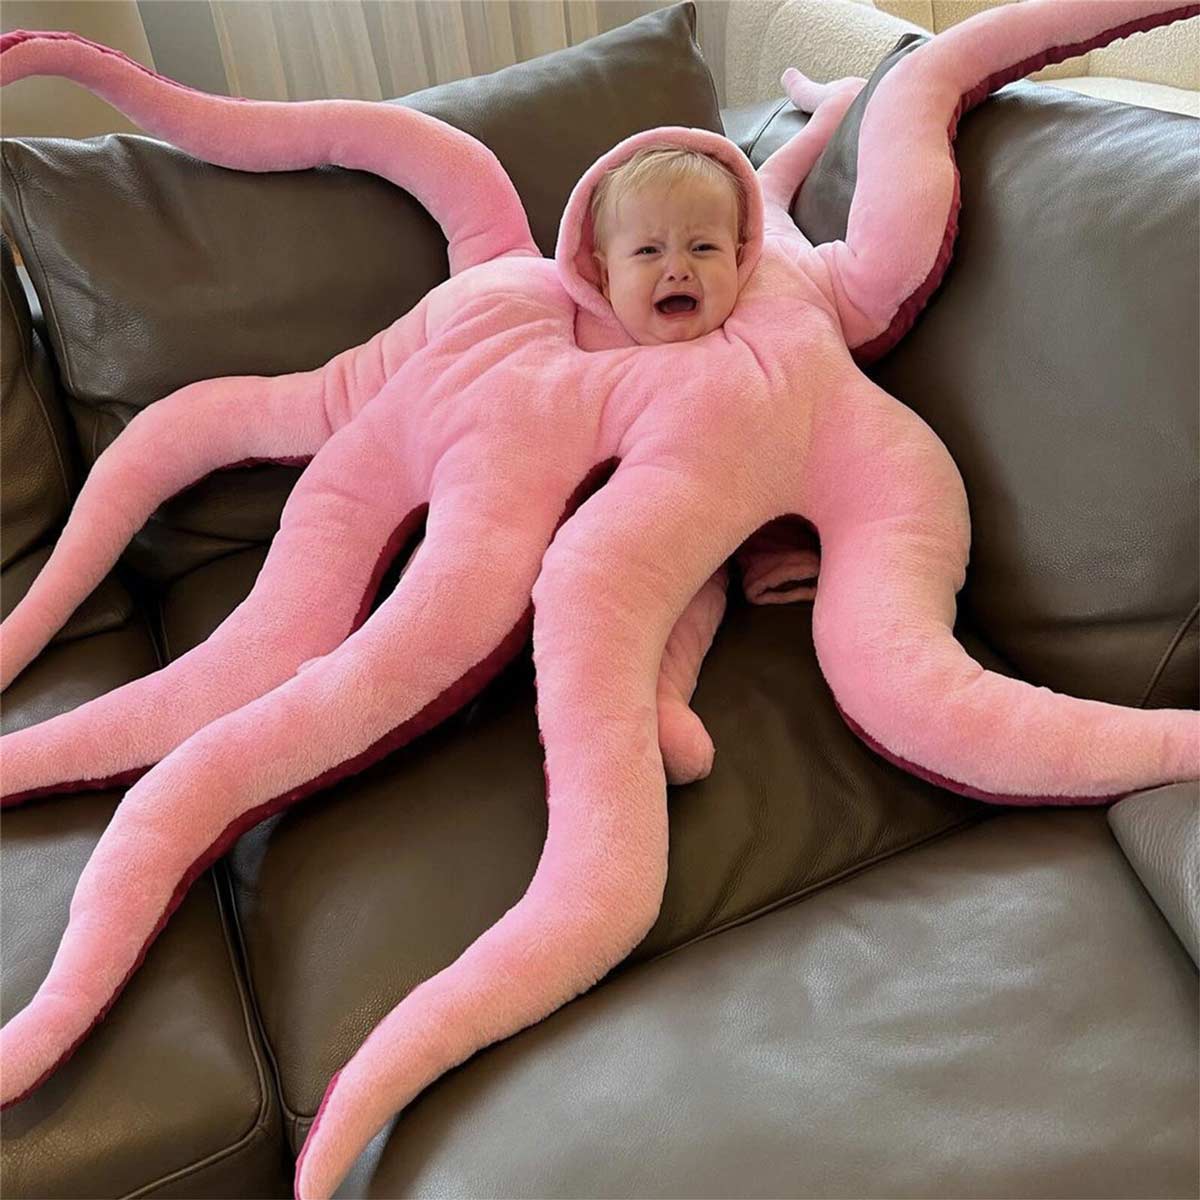 This ad for a children’s costume